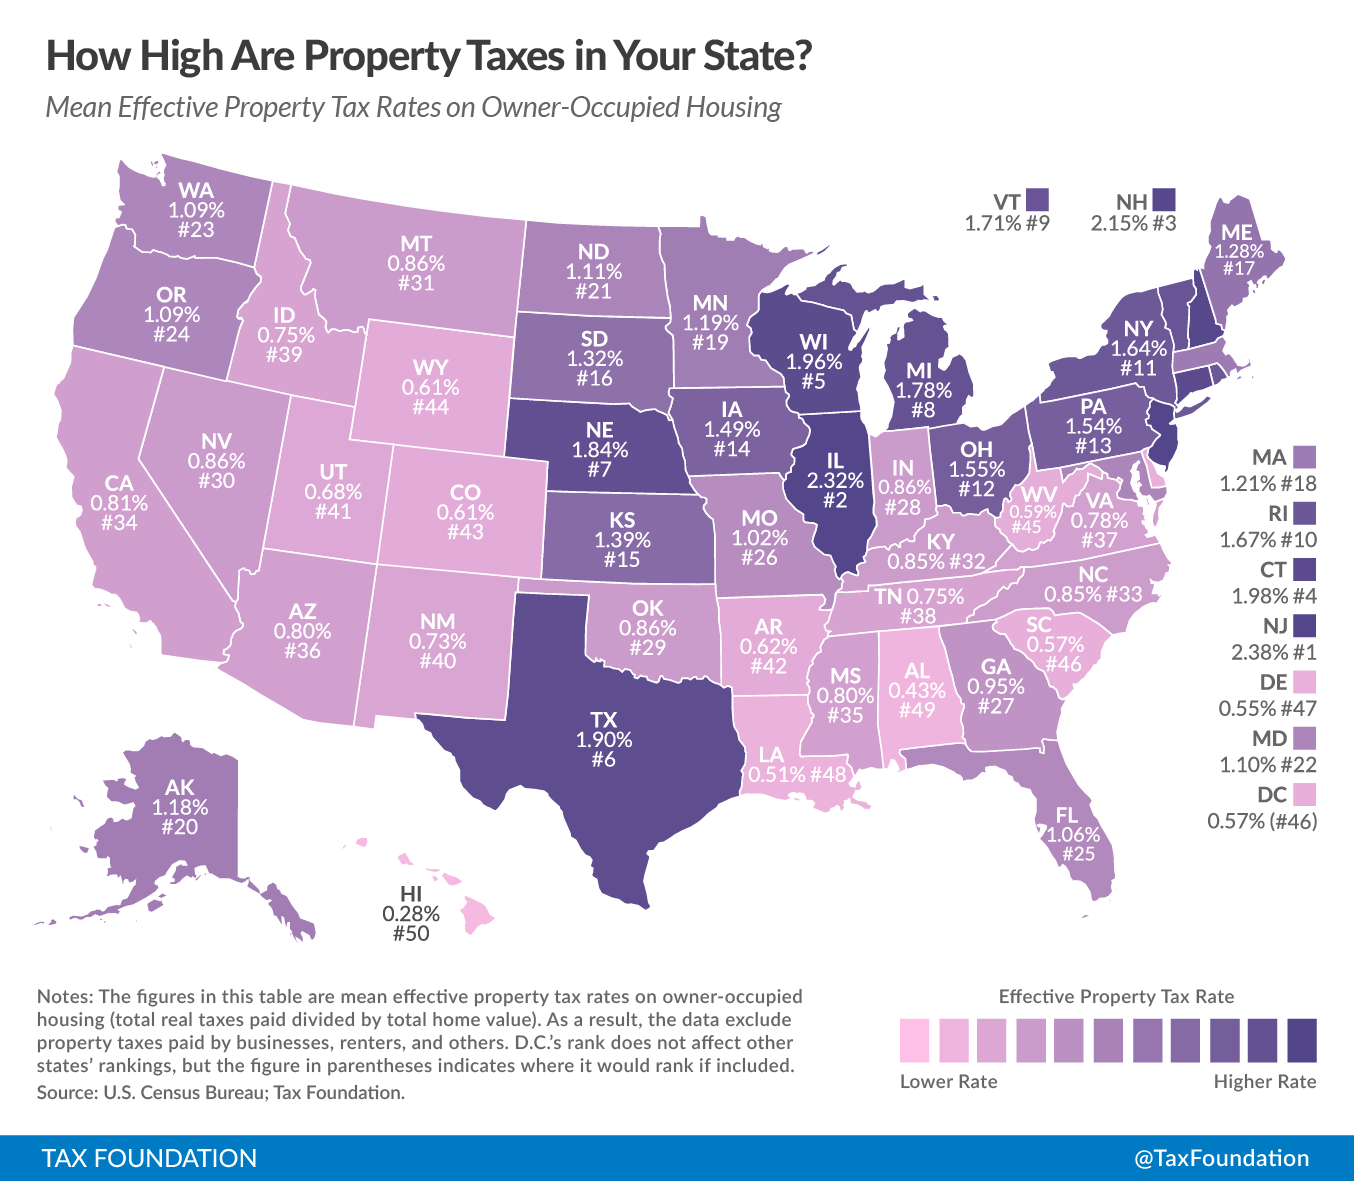 How High Are Property Taxes in Your State?